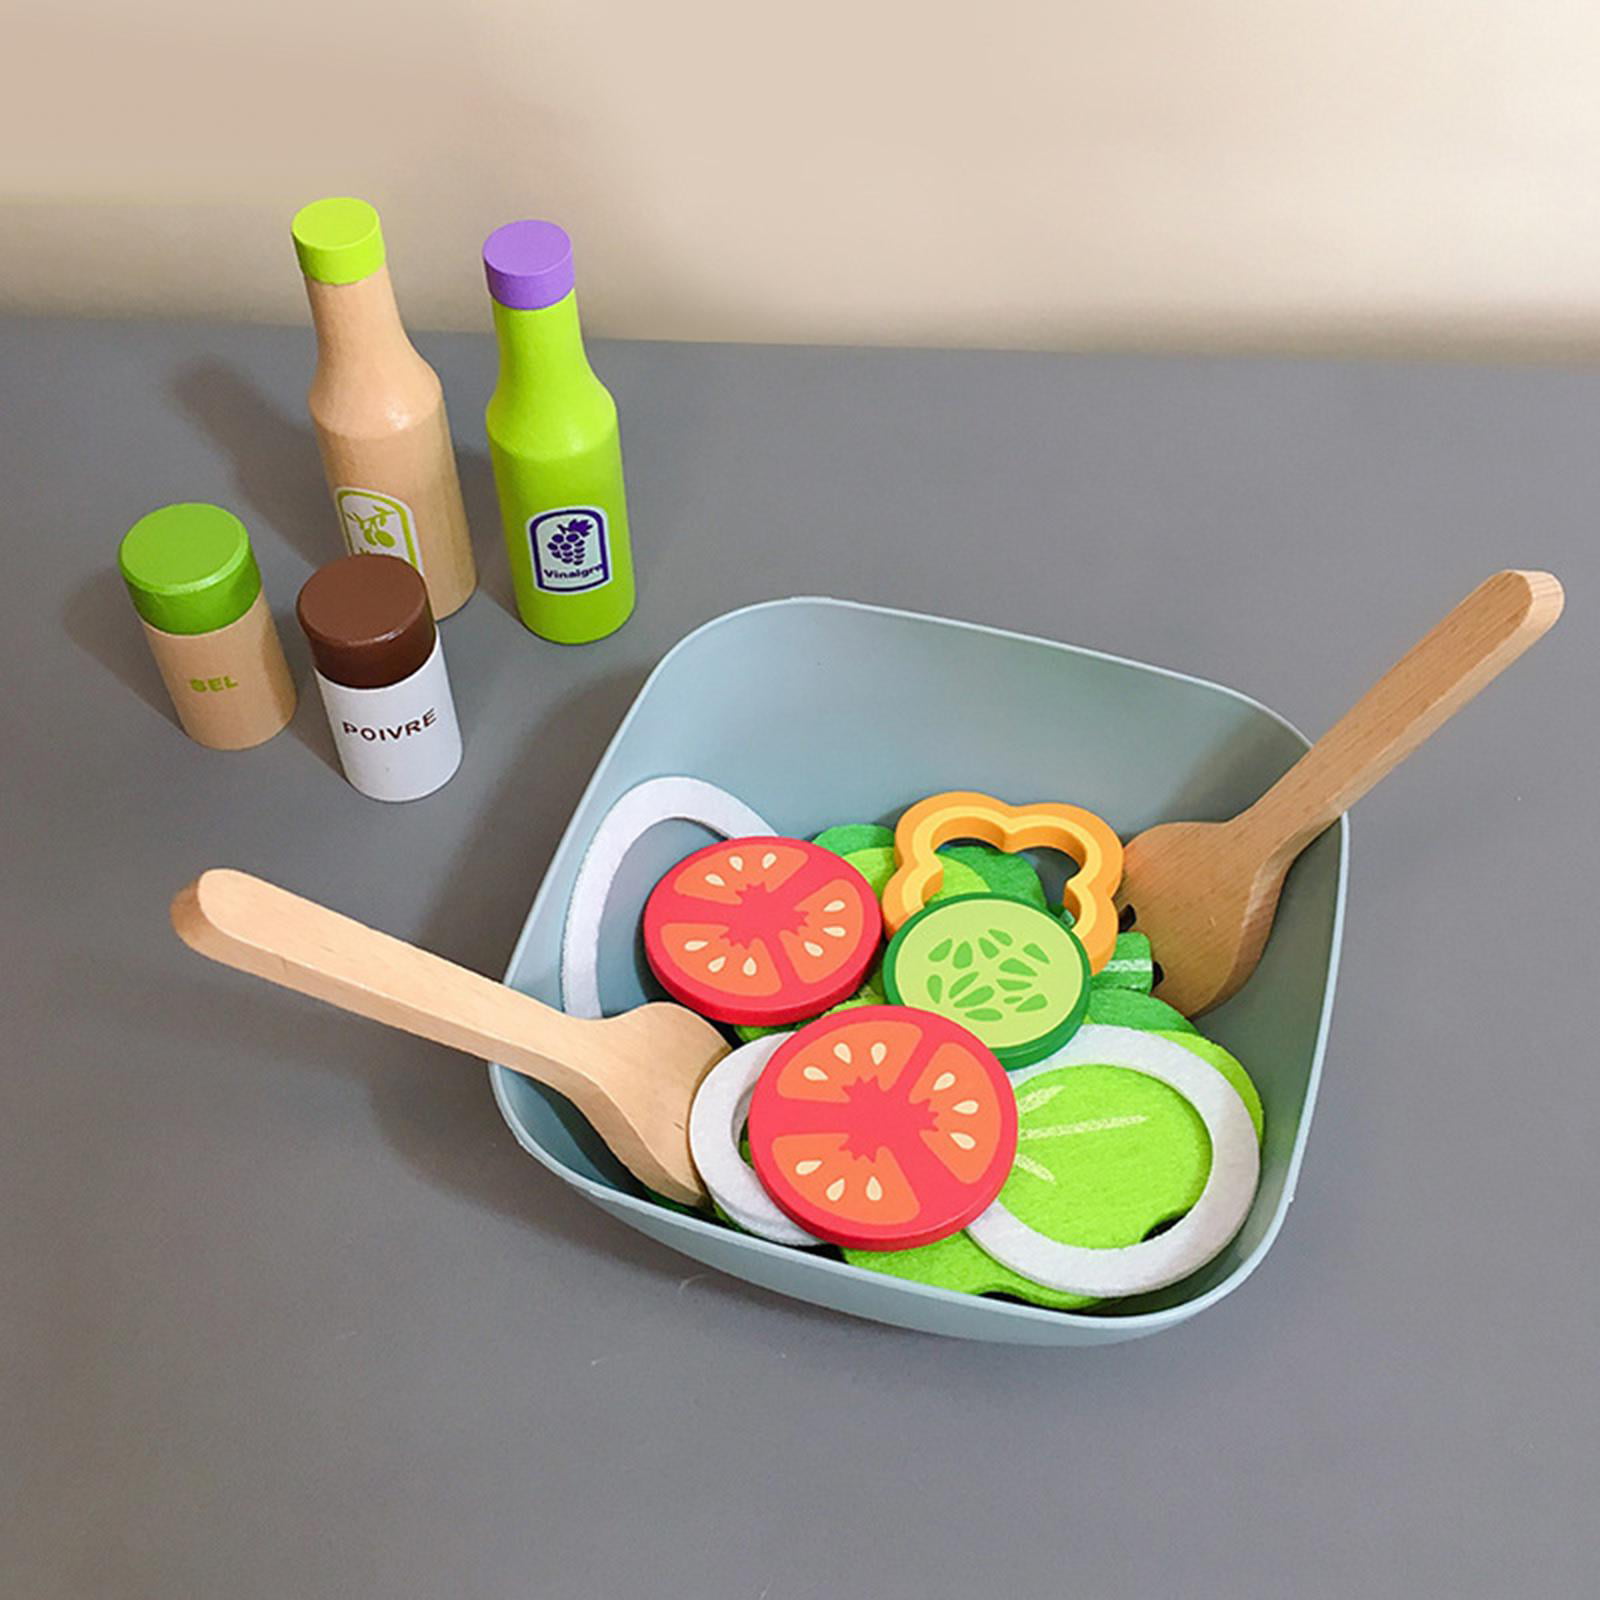 Details about   Pretend Play Kitchen Fruit Vegetable Salad Toys Educational Learning 